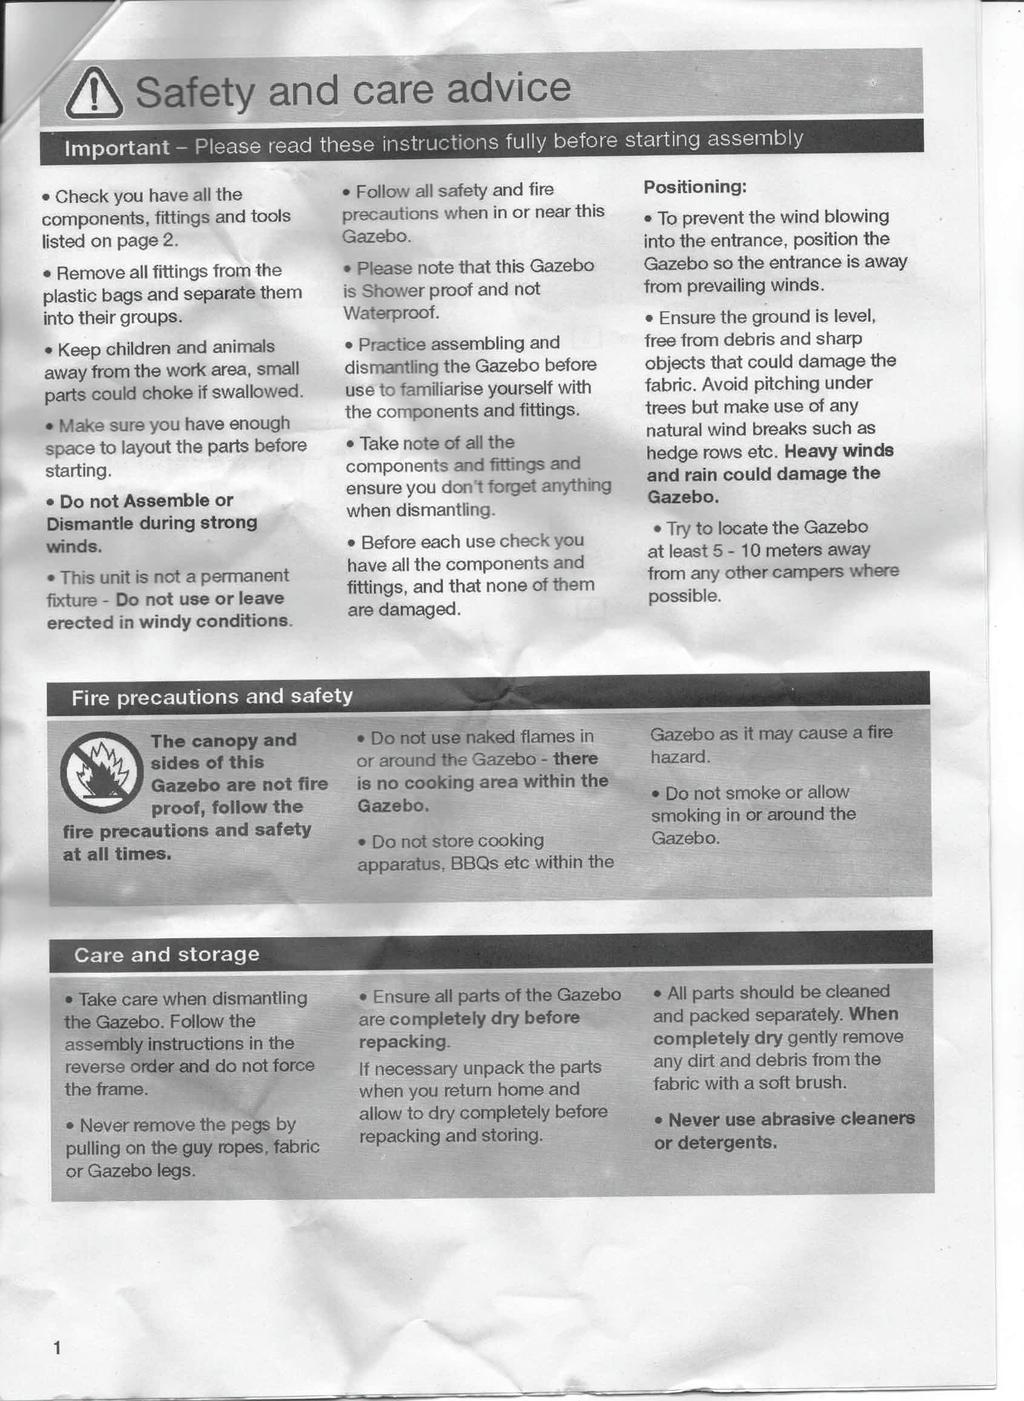 & Safety and care advice -------- Important - Please read these instructions fully before starting assembly Check you have all the components, fittings and tools listed on page 2.